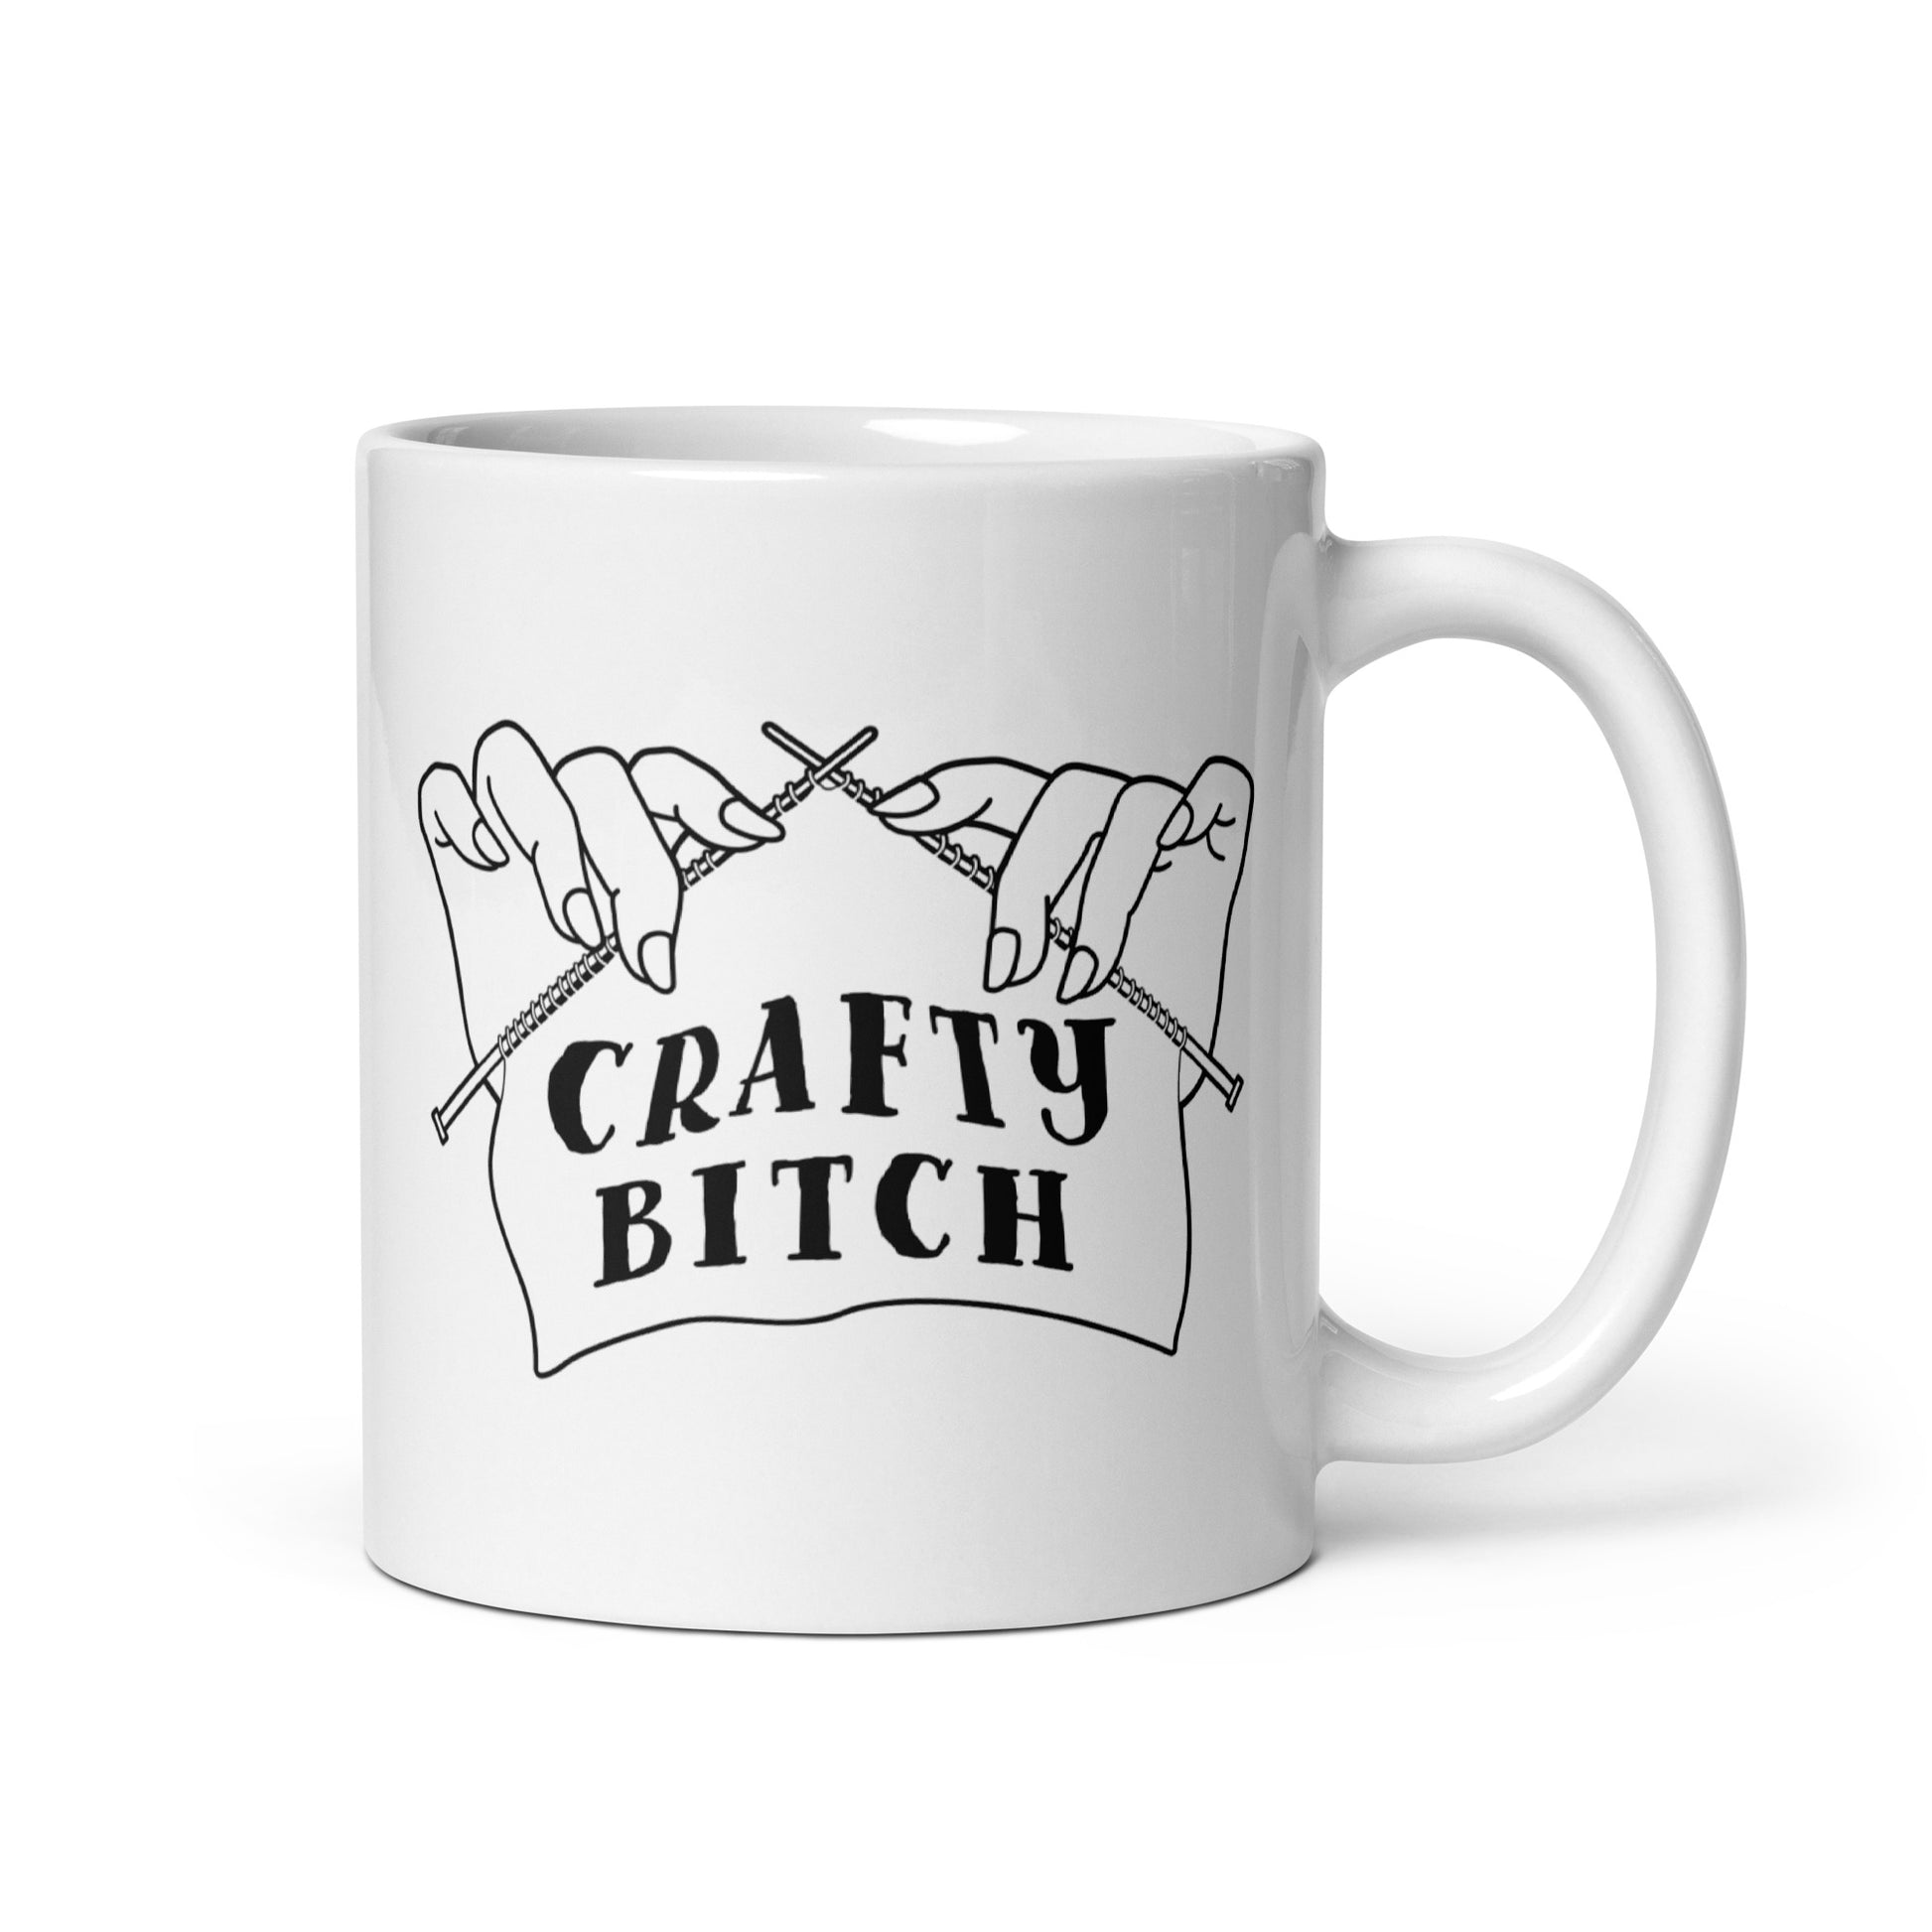 A white ceramic 11 ounce coffee mug featuring a single-color illustration of a pair of hands holding knitting needles. Fabric on the needles features text that reads "crafty bitch".